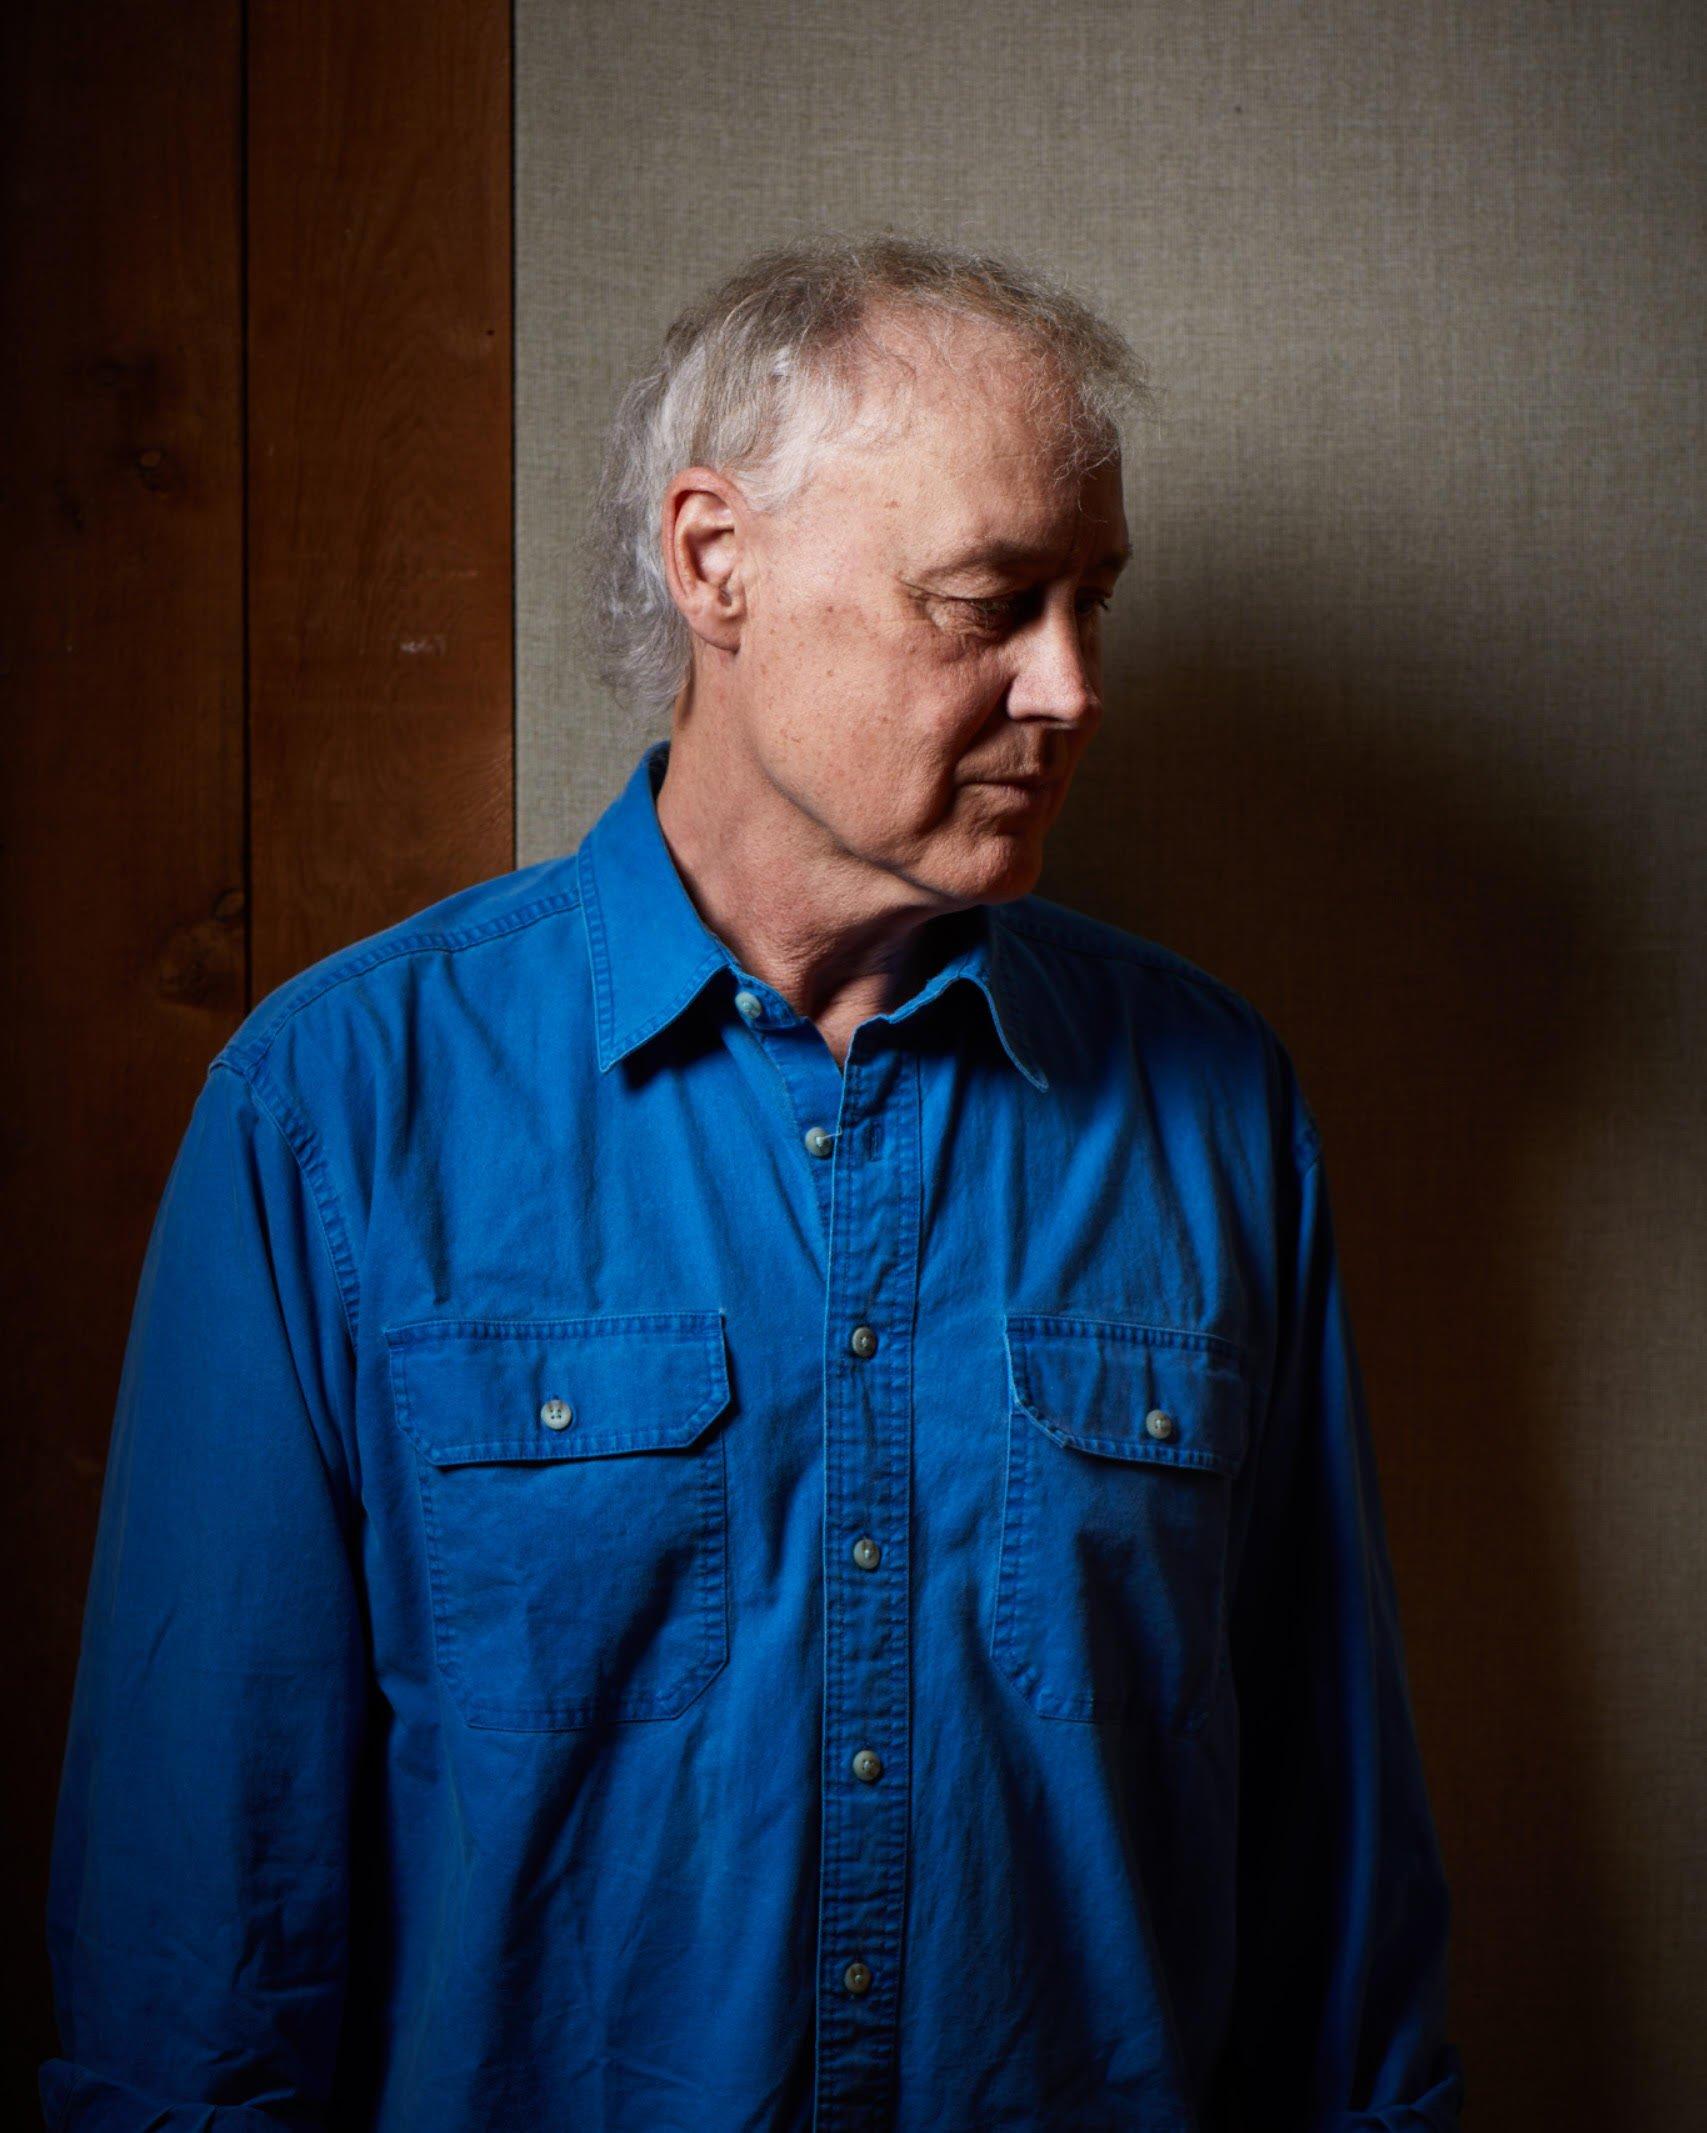 Bruce Hornsby Talks New Album Non-Secure Connection, Working With Spike Lee And His Ongoing Support pic